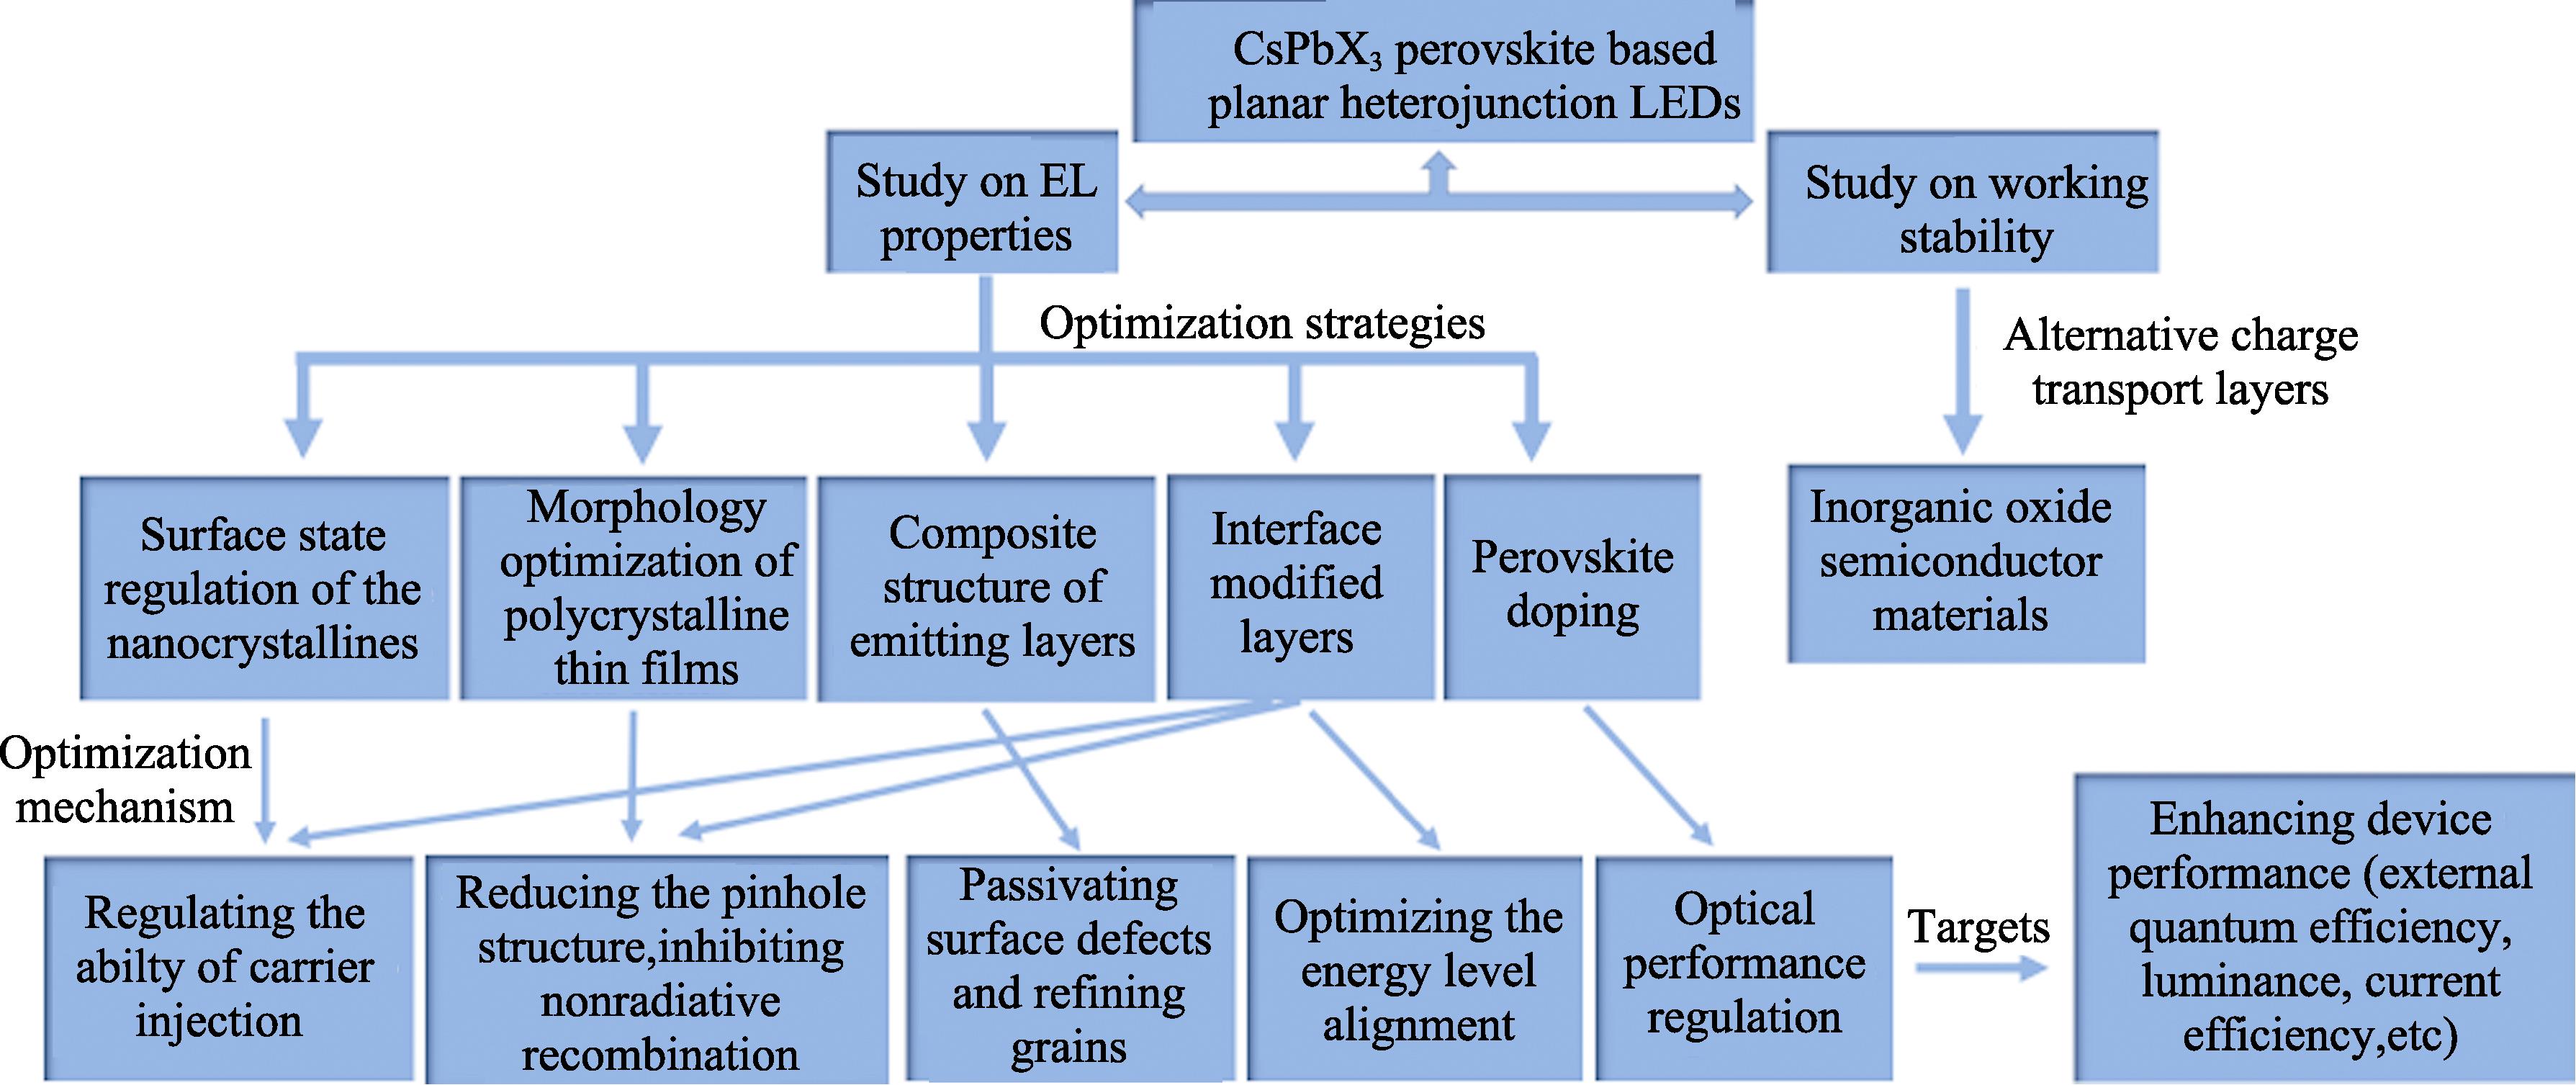 Optimization strategies for luminescence performance and stability of LED devices